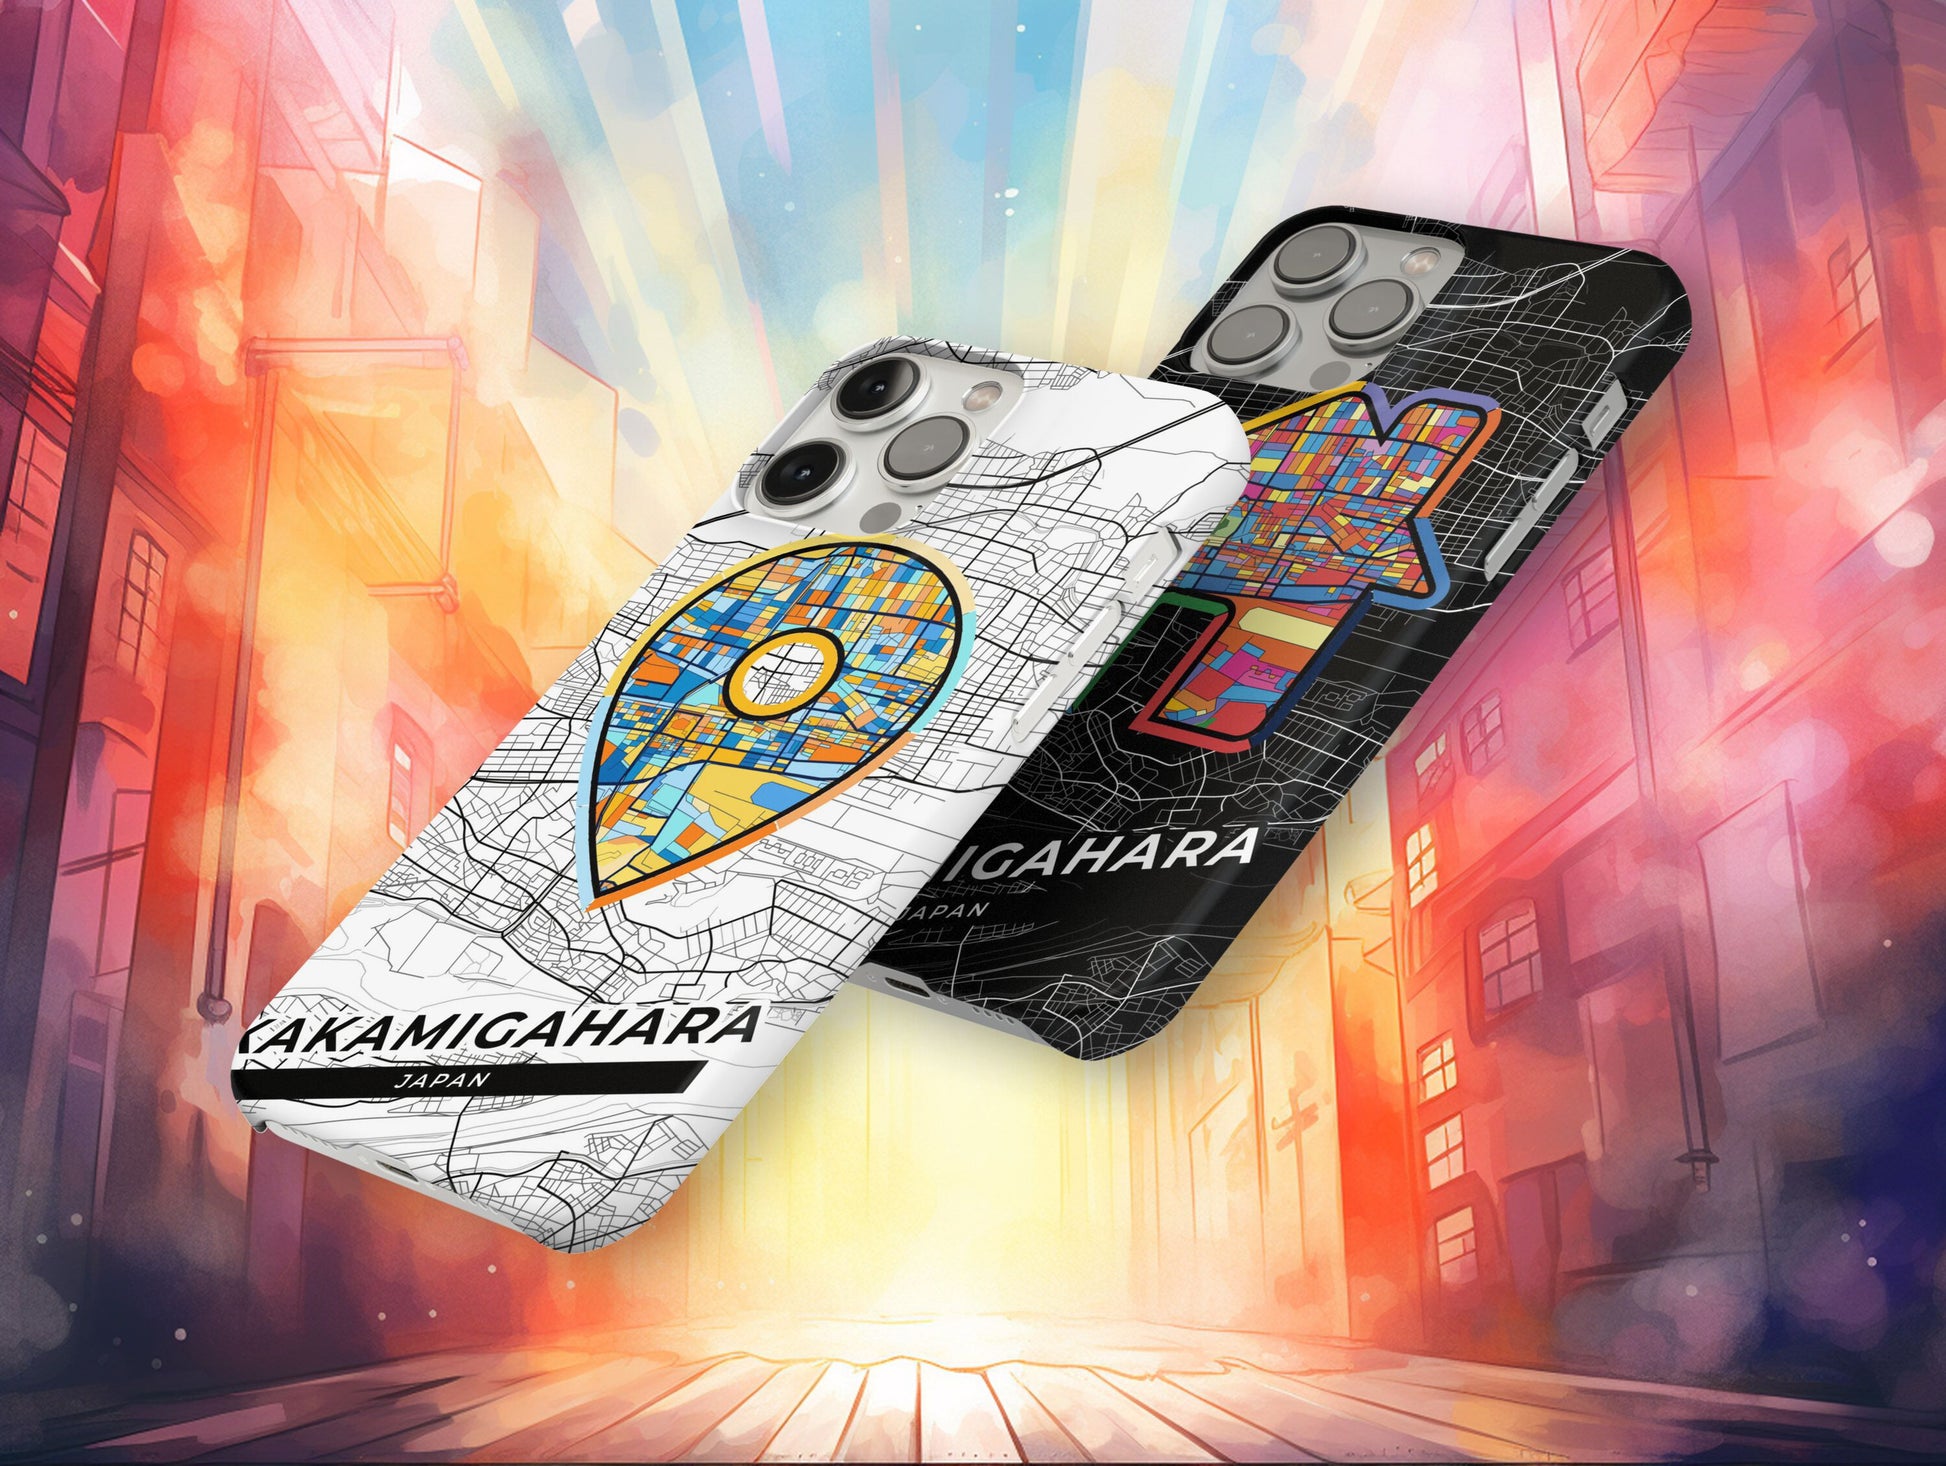 Kakamigahara Japan slim phone case with colorful icon. Birthday, wedding or housewarming gift. Couple match cases.